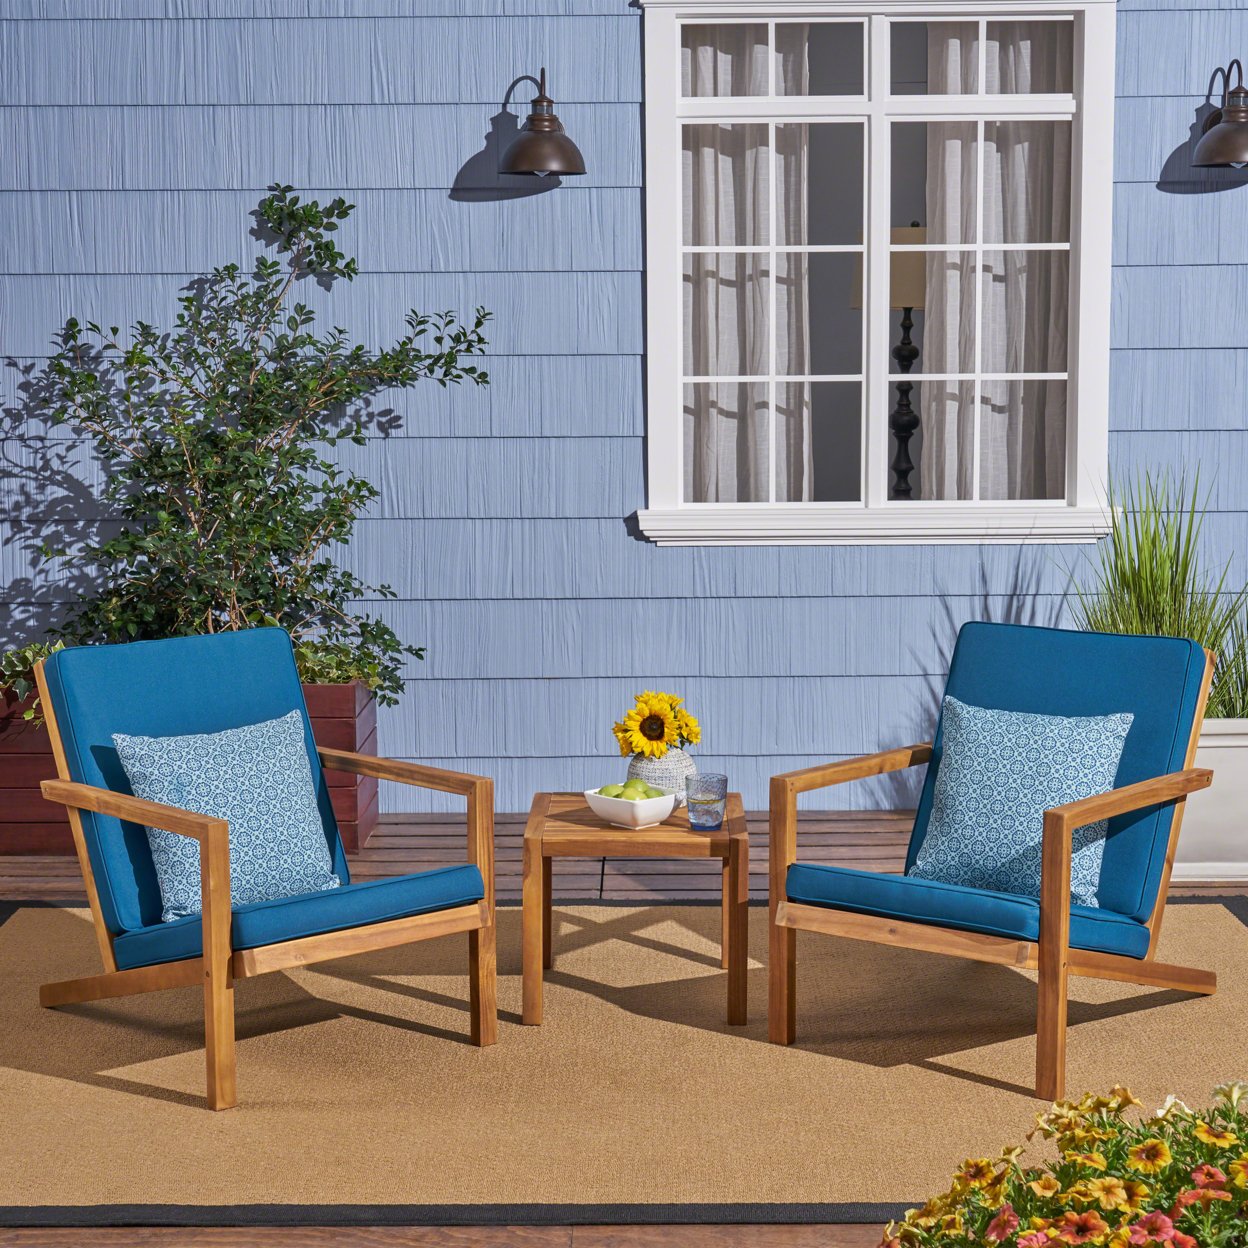 Lester Outdoor 3 Piece Acacia Wood Chat Set With Water Resistant Cushions - Dark Teal